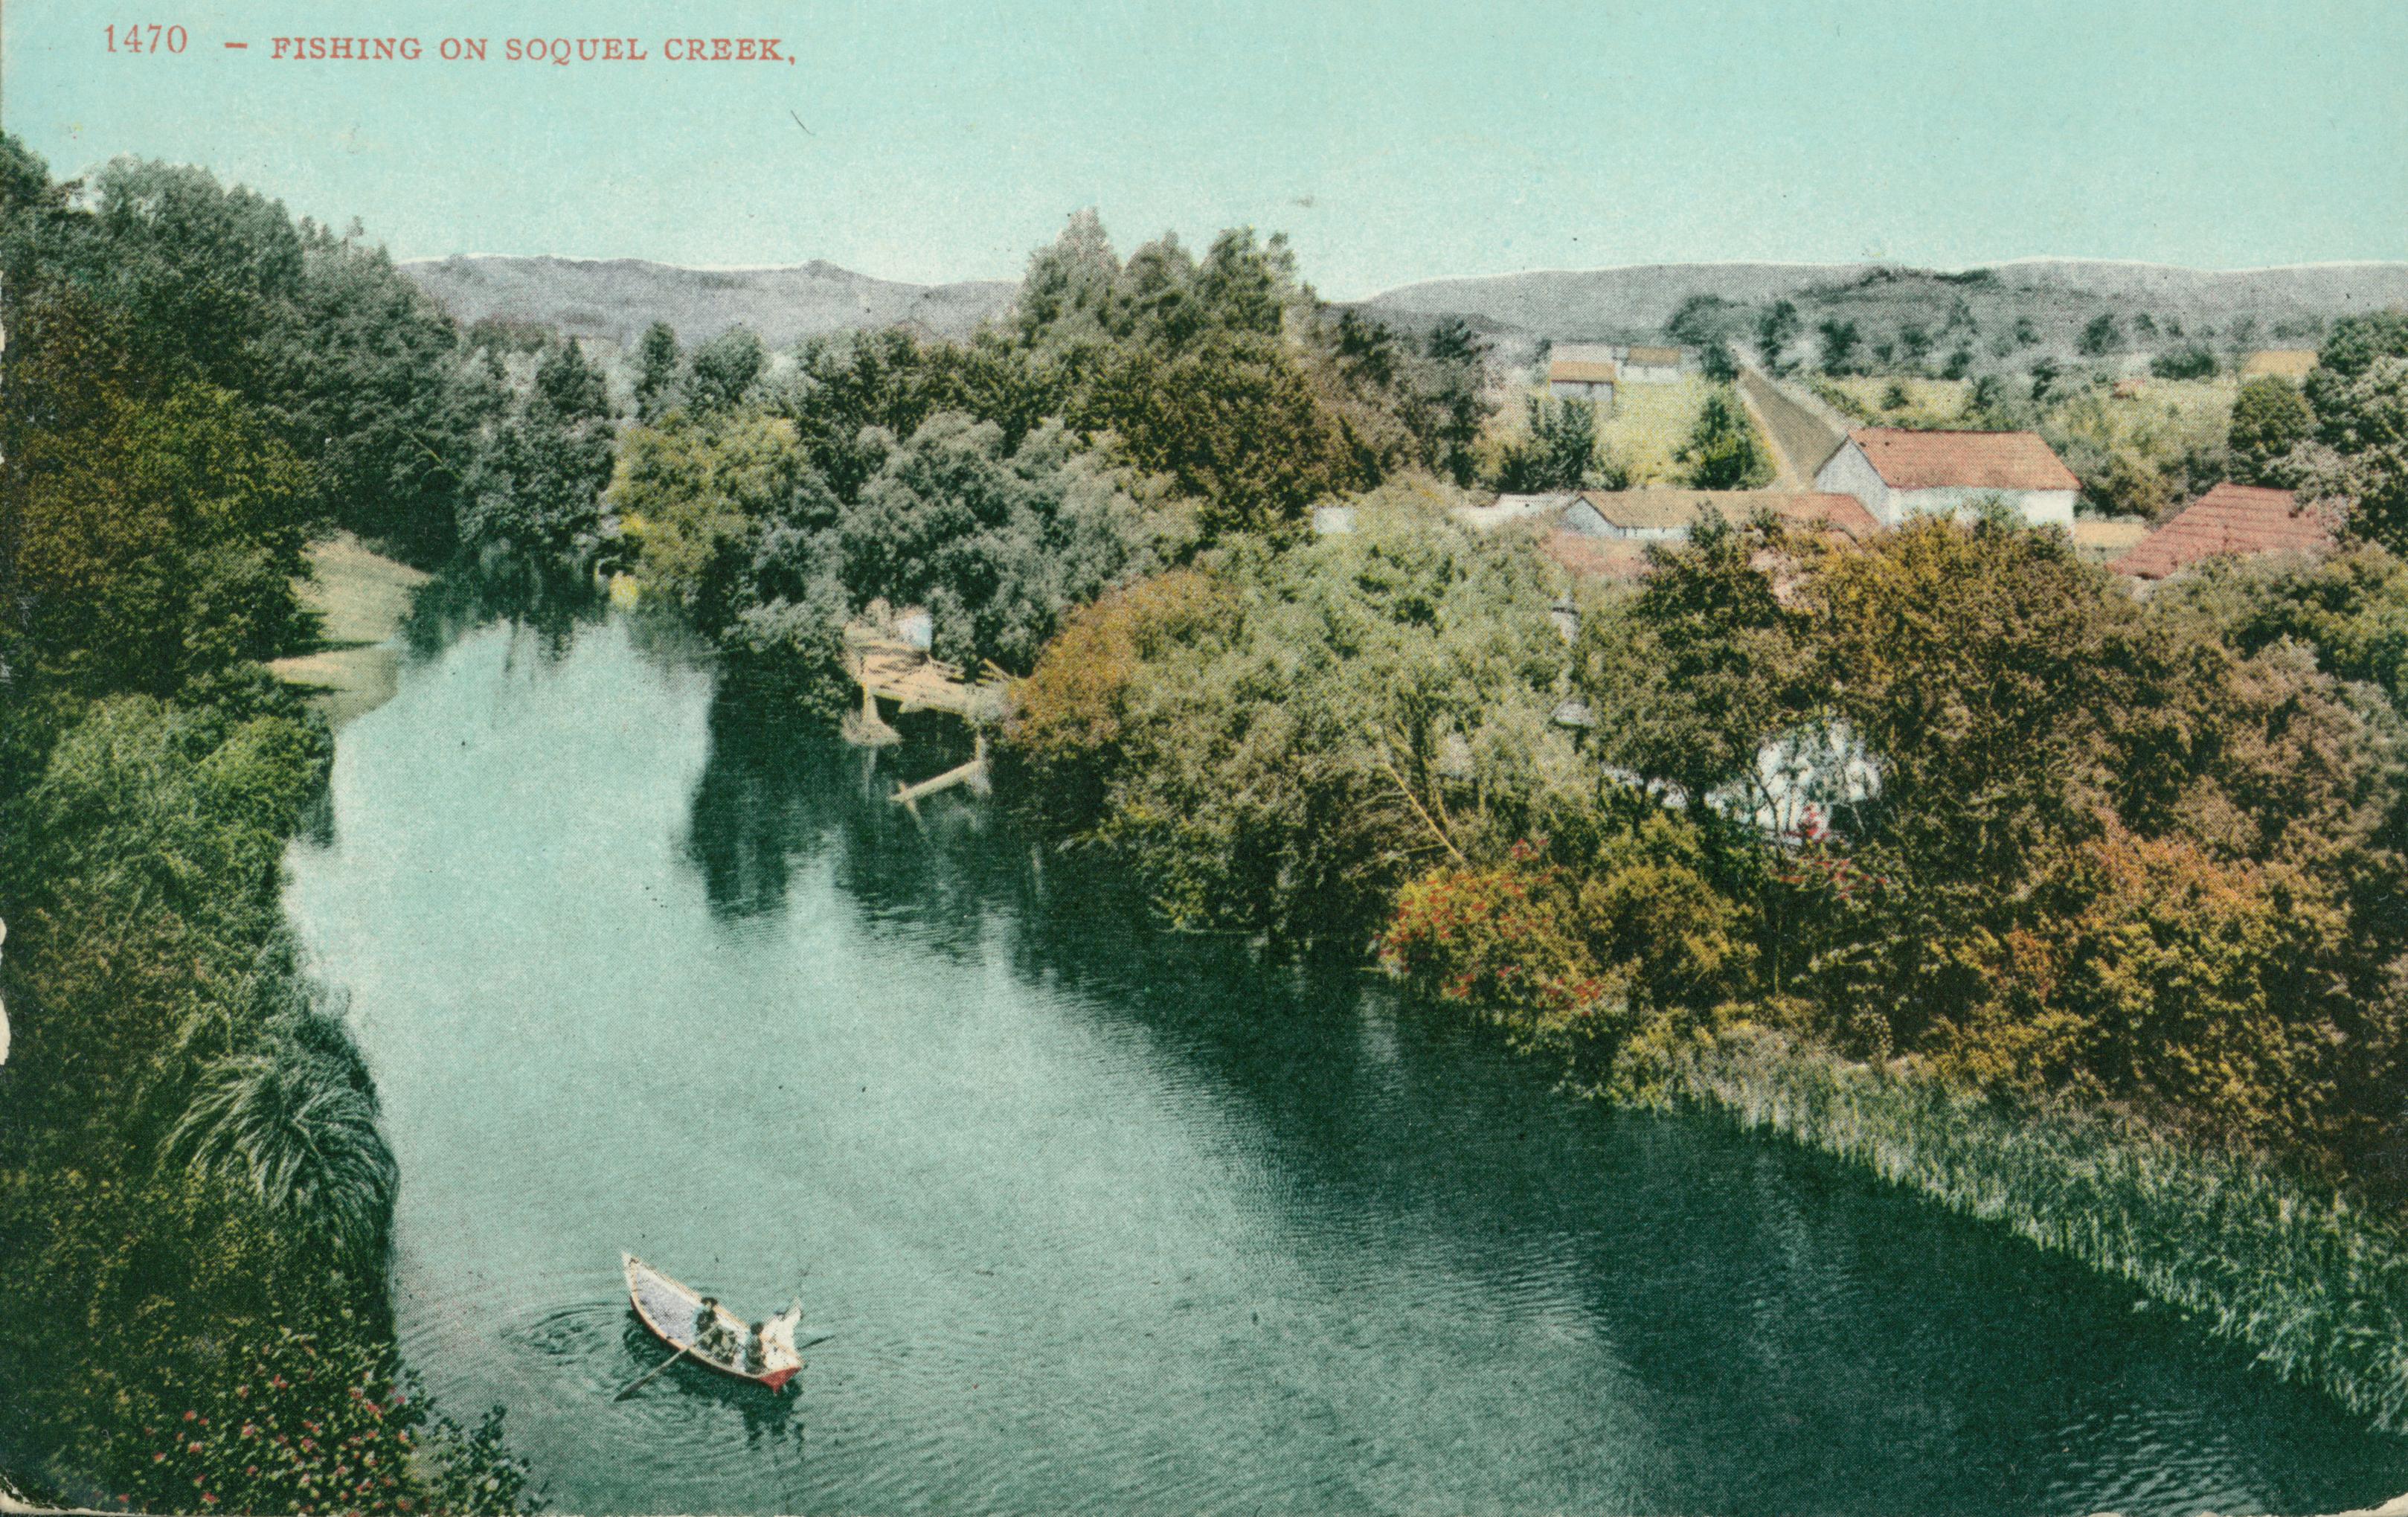 People in a canoe-like boat fishing on the river/creek surrounded by trees and bushes, buildings near the banks of the river/creek